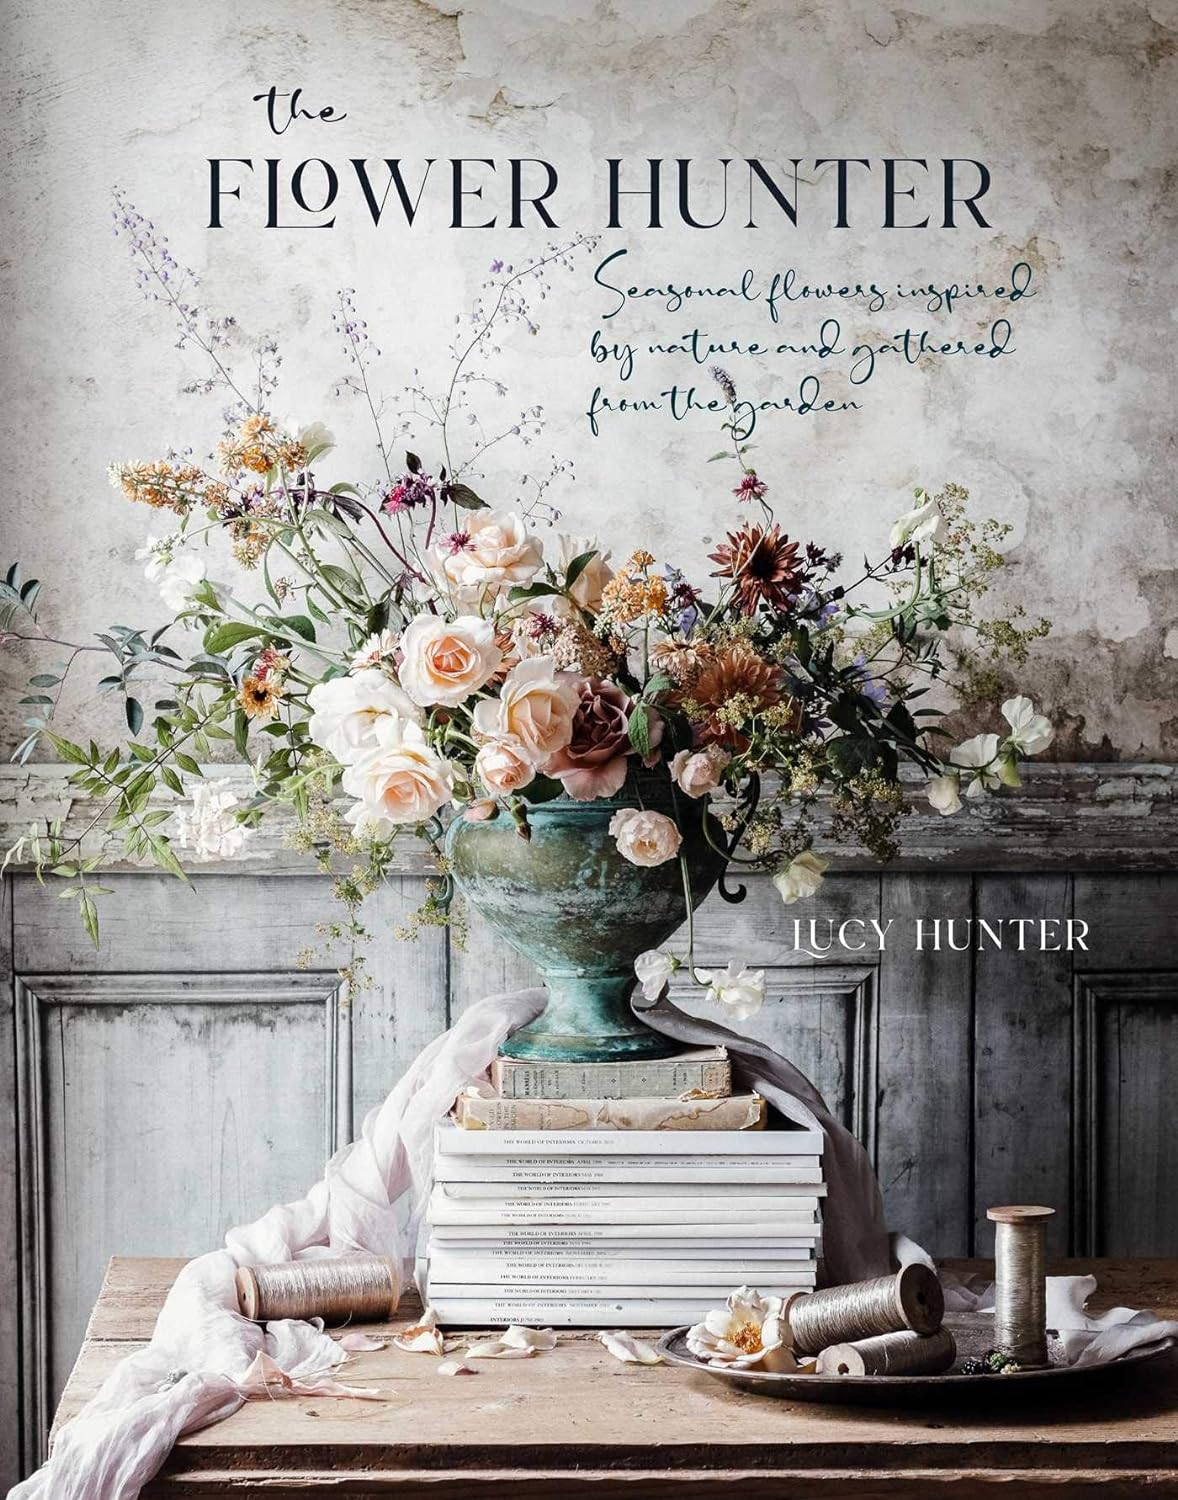 Flower Hunter: Seasonal Flowers Inspired by Nature and Gathered from the Garden